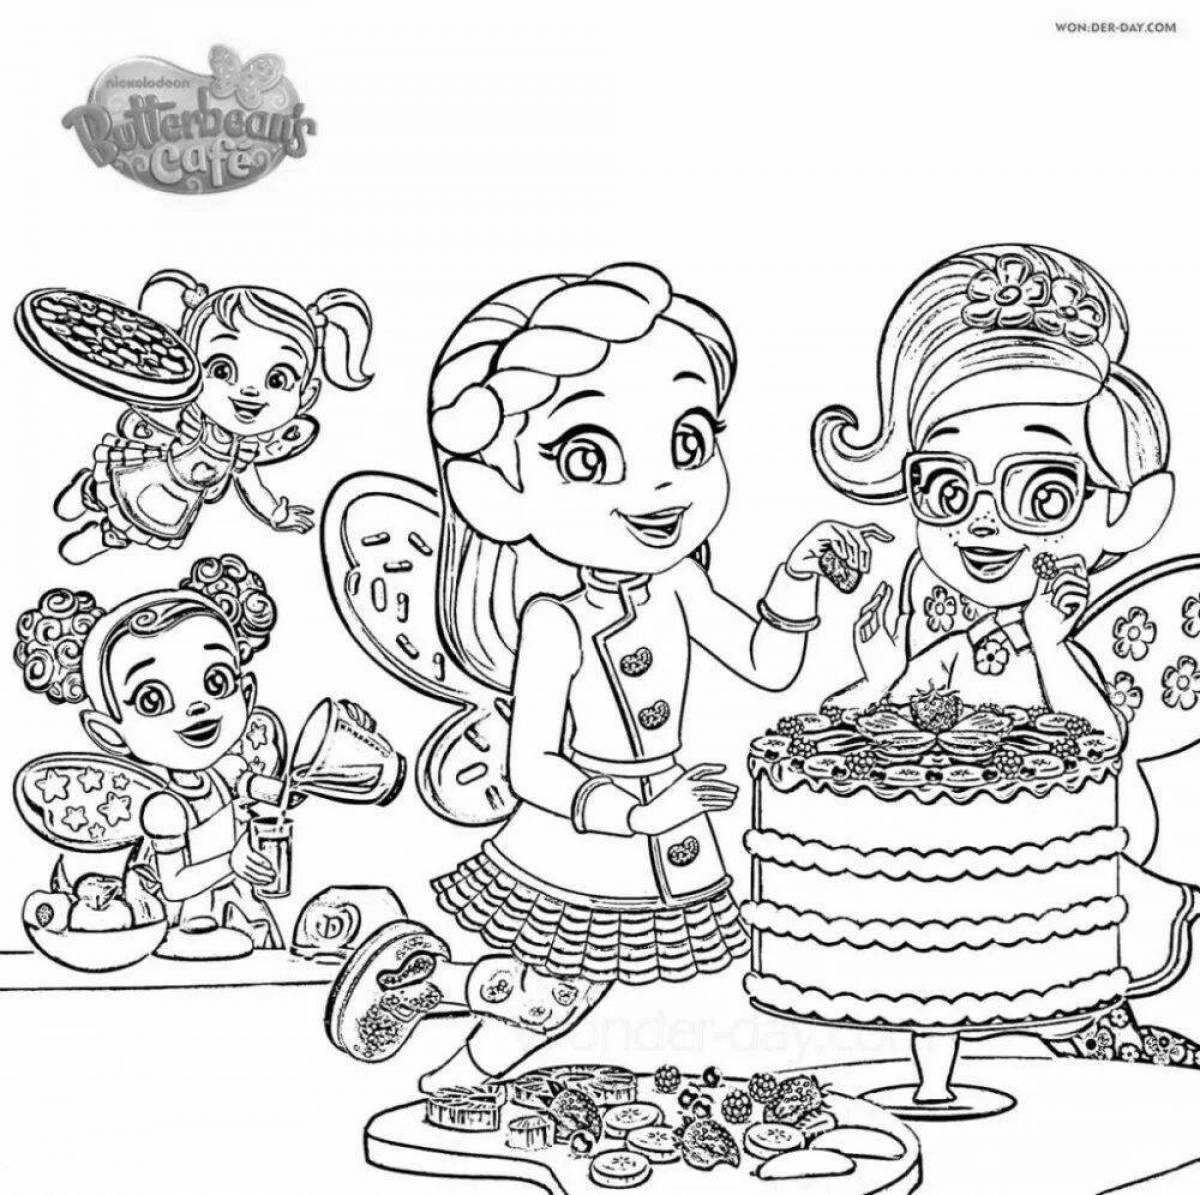 Color-laden cafe butterbean coloring page